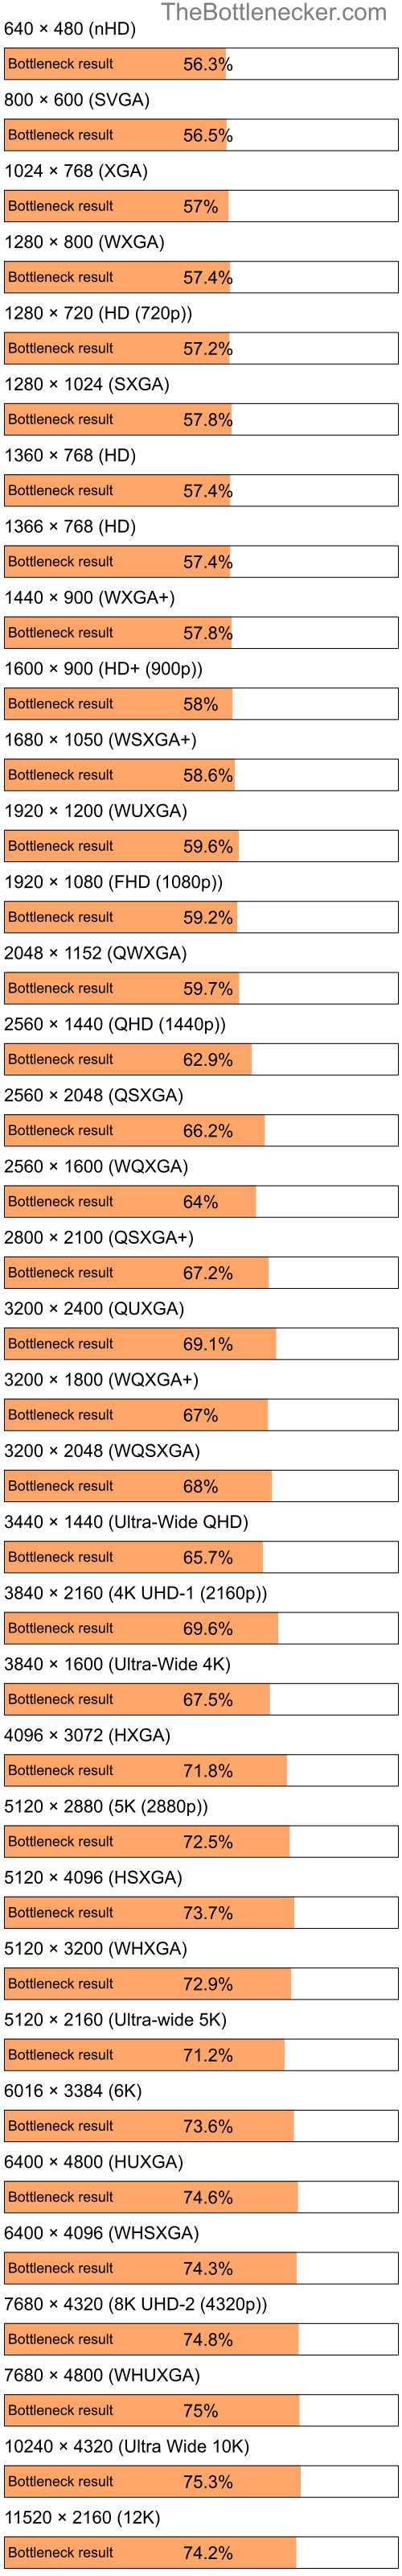 Bottleneck results by resolution for Intel Pentium 4 and NVIDIA GeForce 8600 GS in Processor Intense Tasks